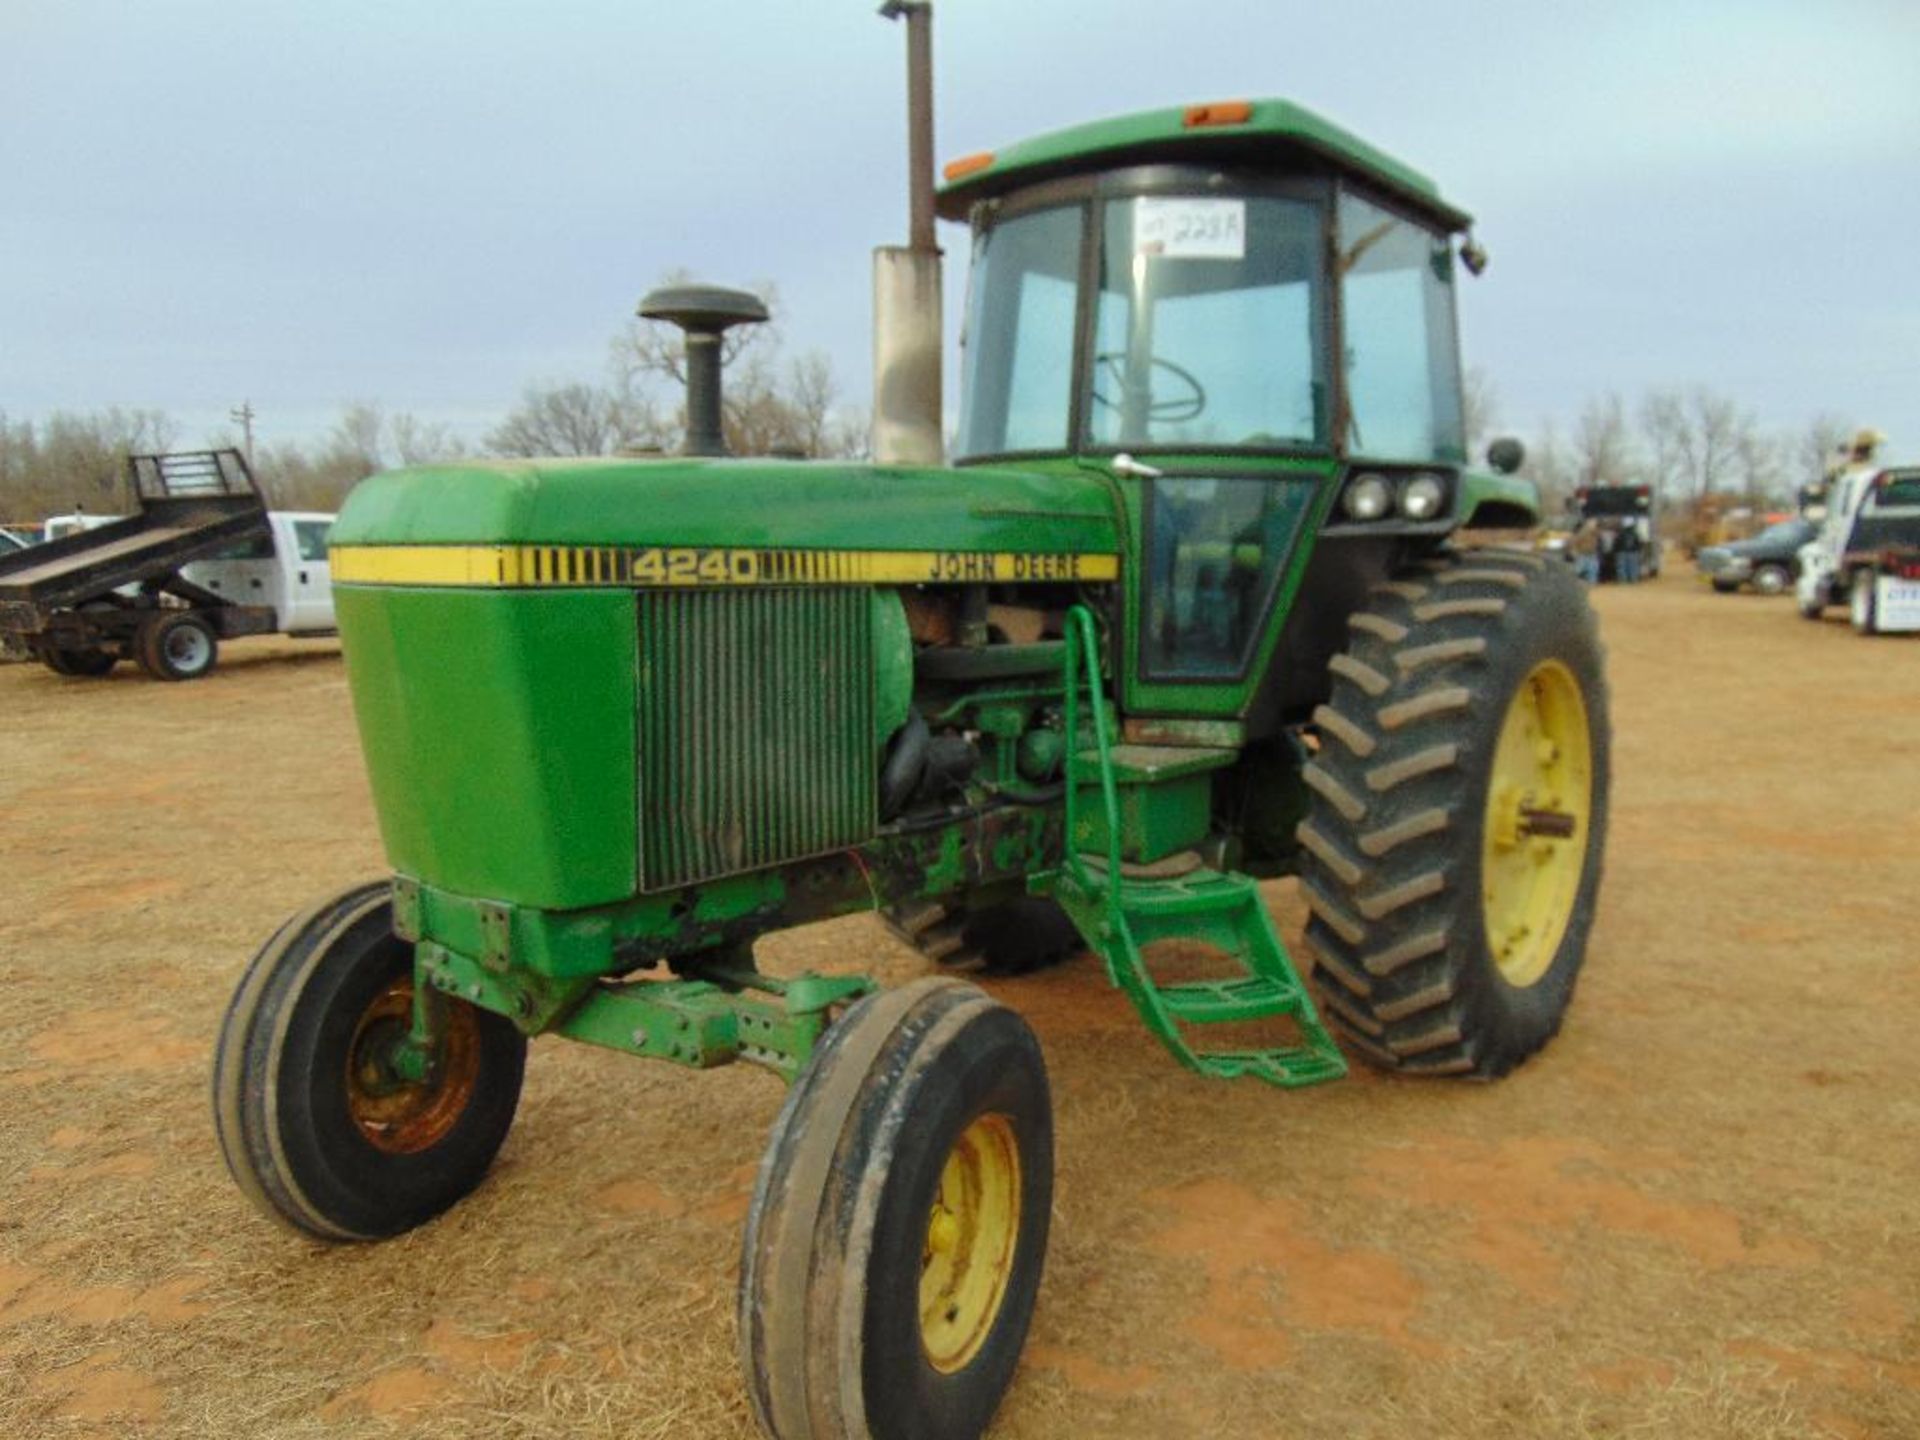 John Deere 4240 Farm Tractor s/n 006911r, 3pt ,pto, 3 remotes, hour meter reads 9892 hrs, - Image 2 of 10